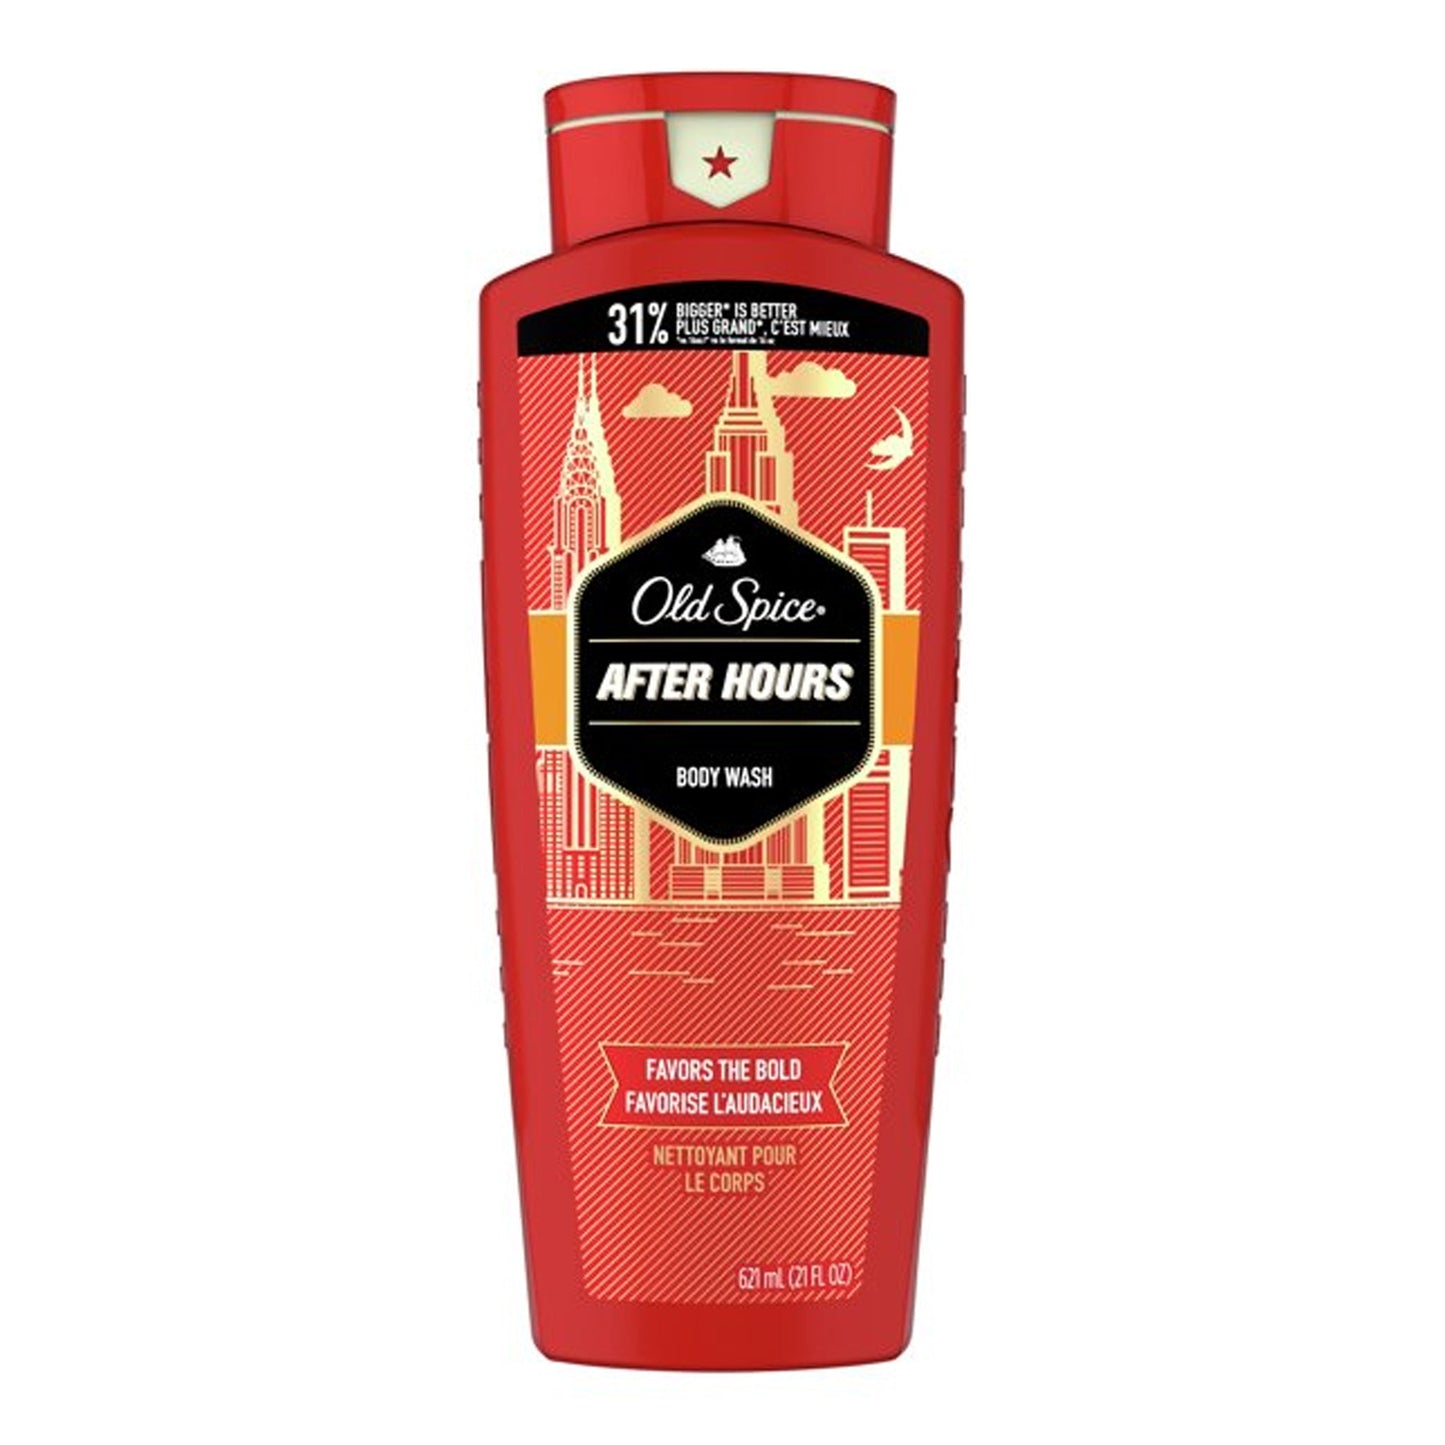 OLD SPICE - AFTER HOURS BODY WASH - 473ML